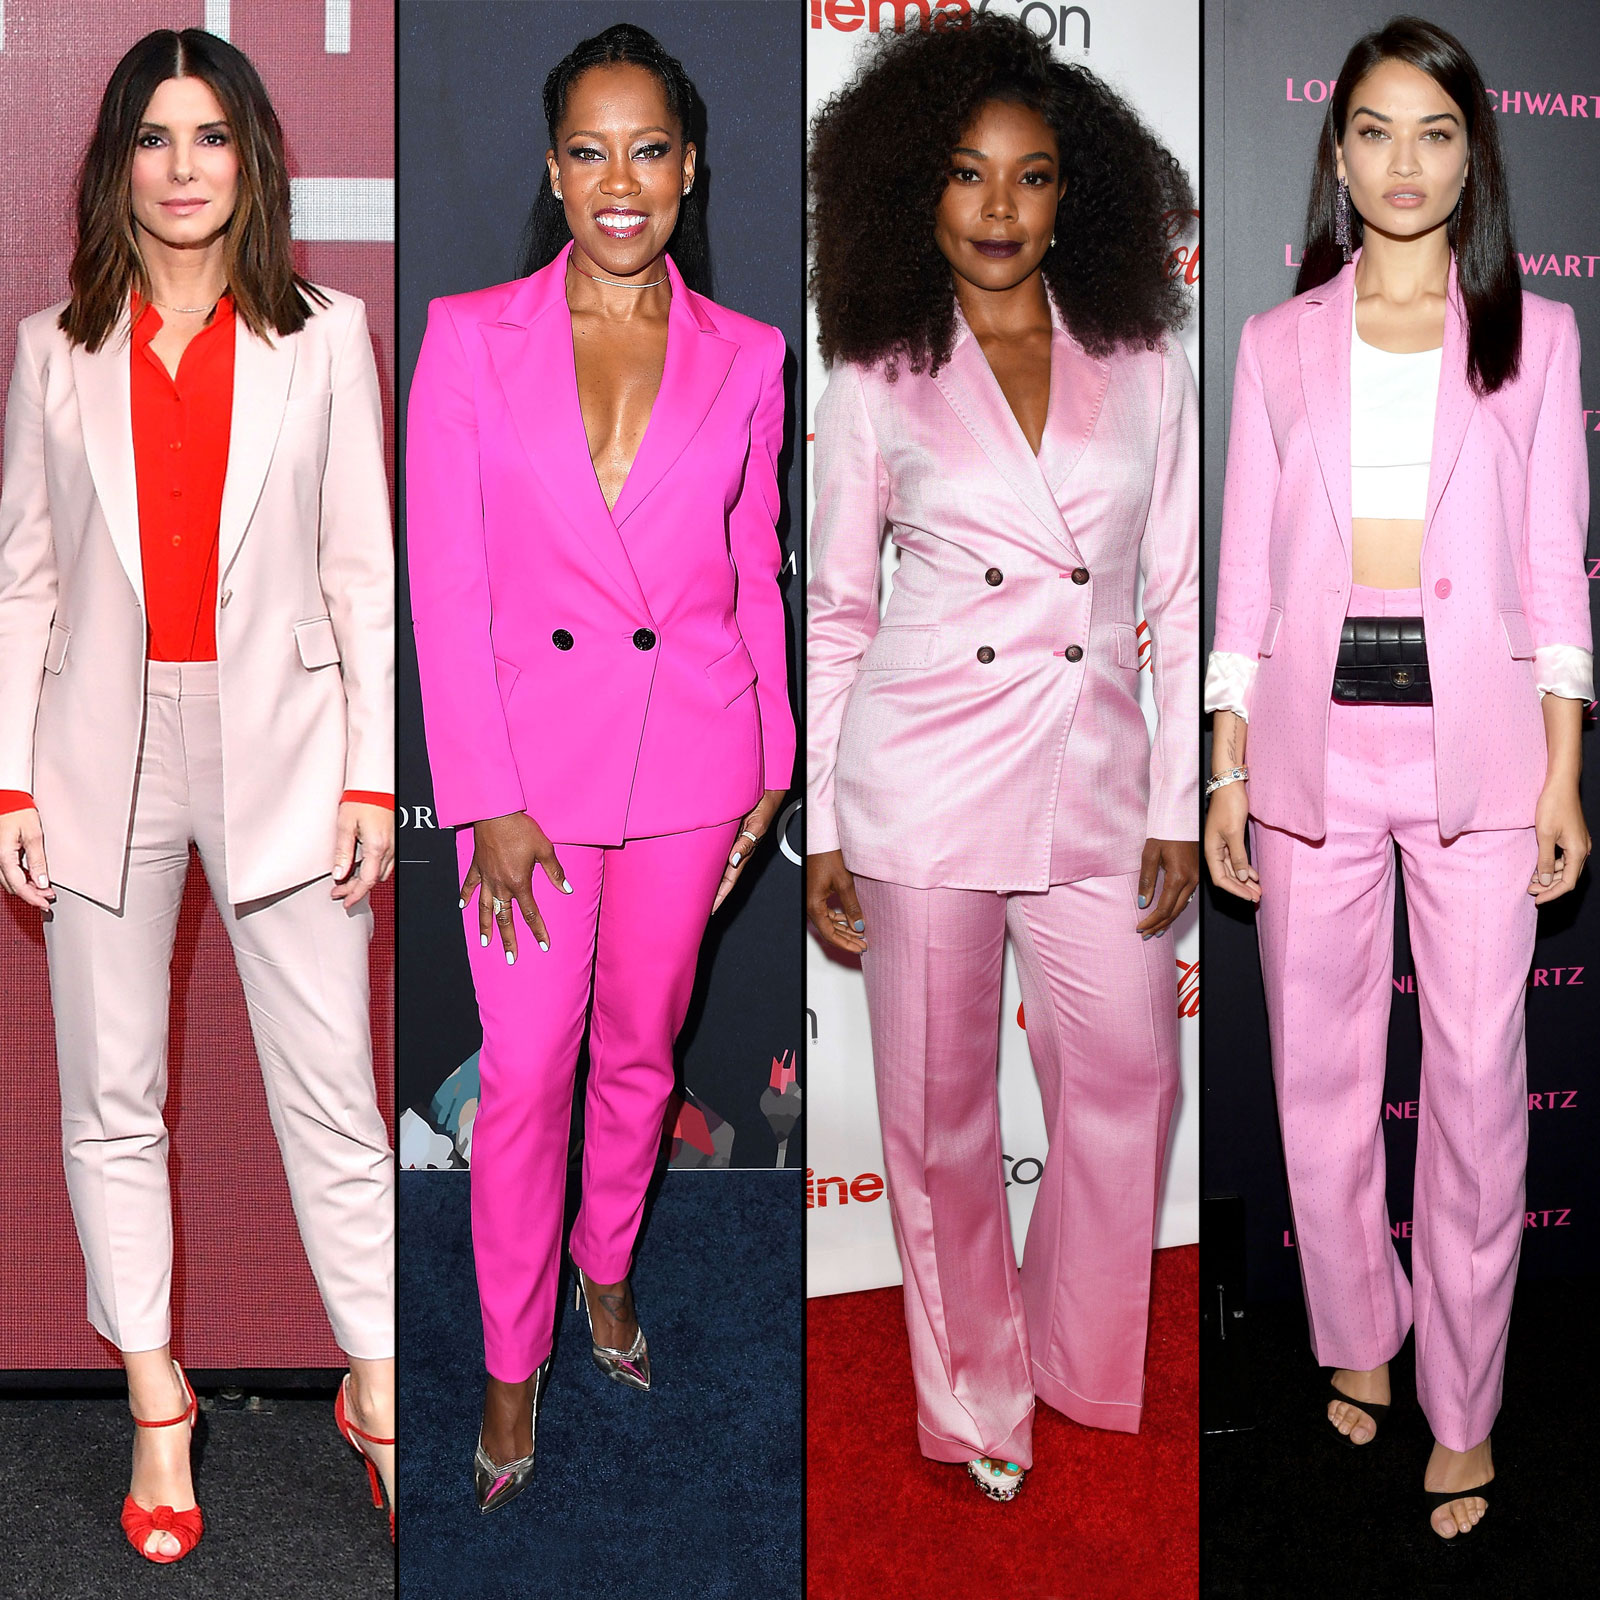 Why Kerry Washington, Amy Schumer And More Stars Are Wearing Pink Suits